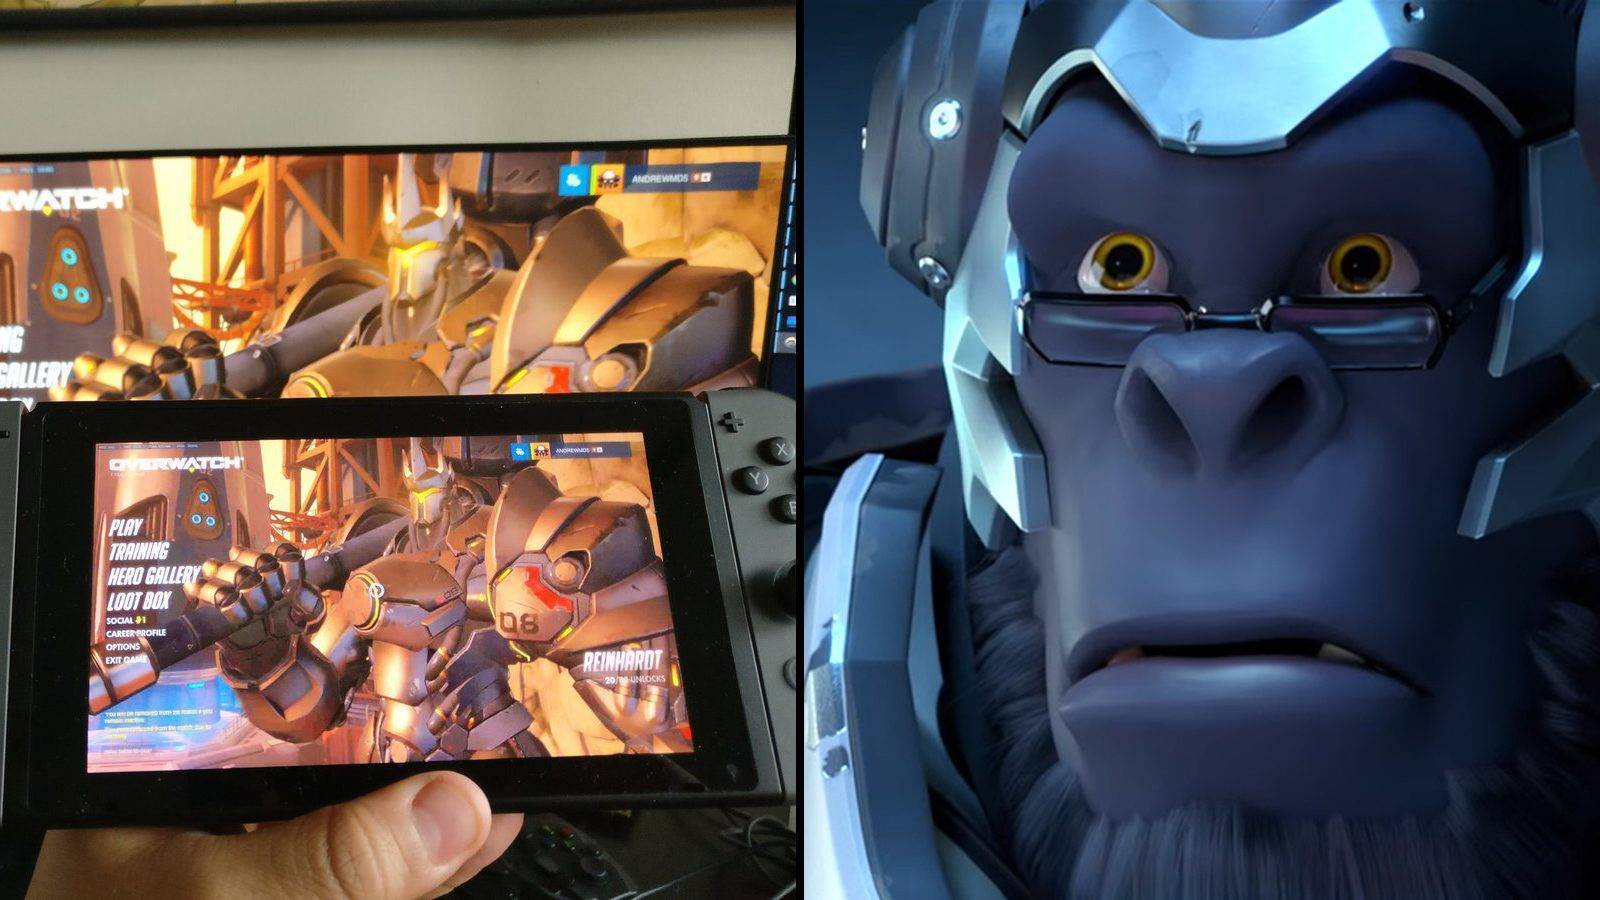 overwatch 2 switch download free